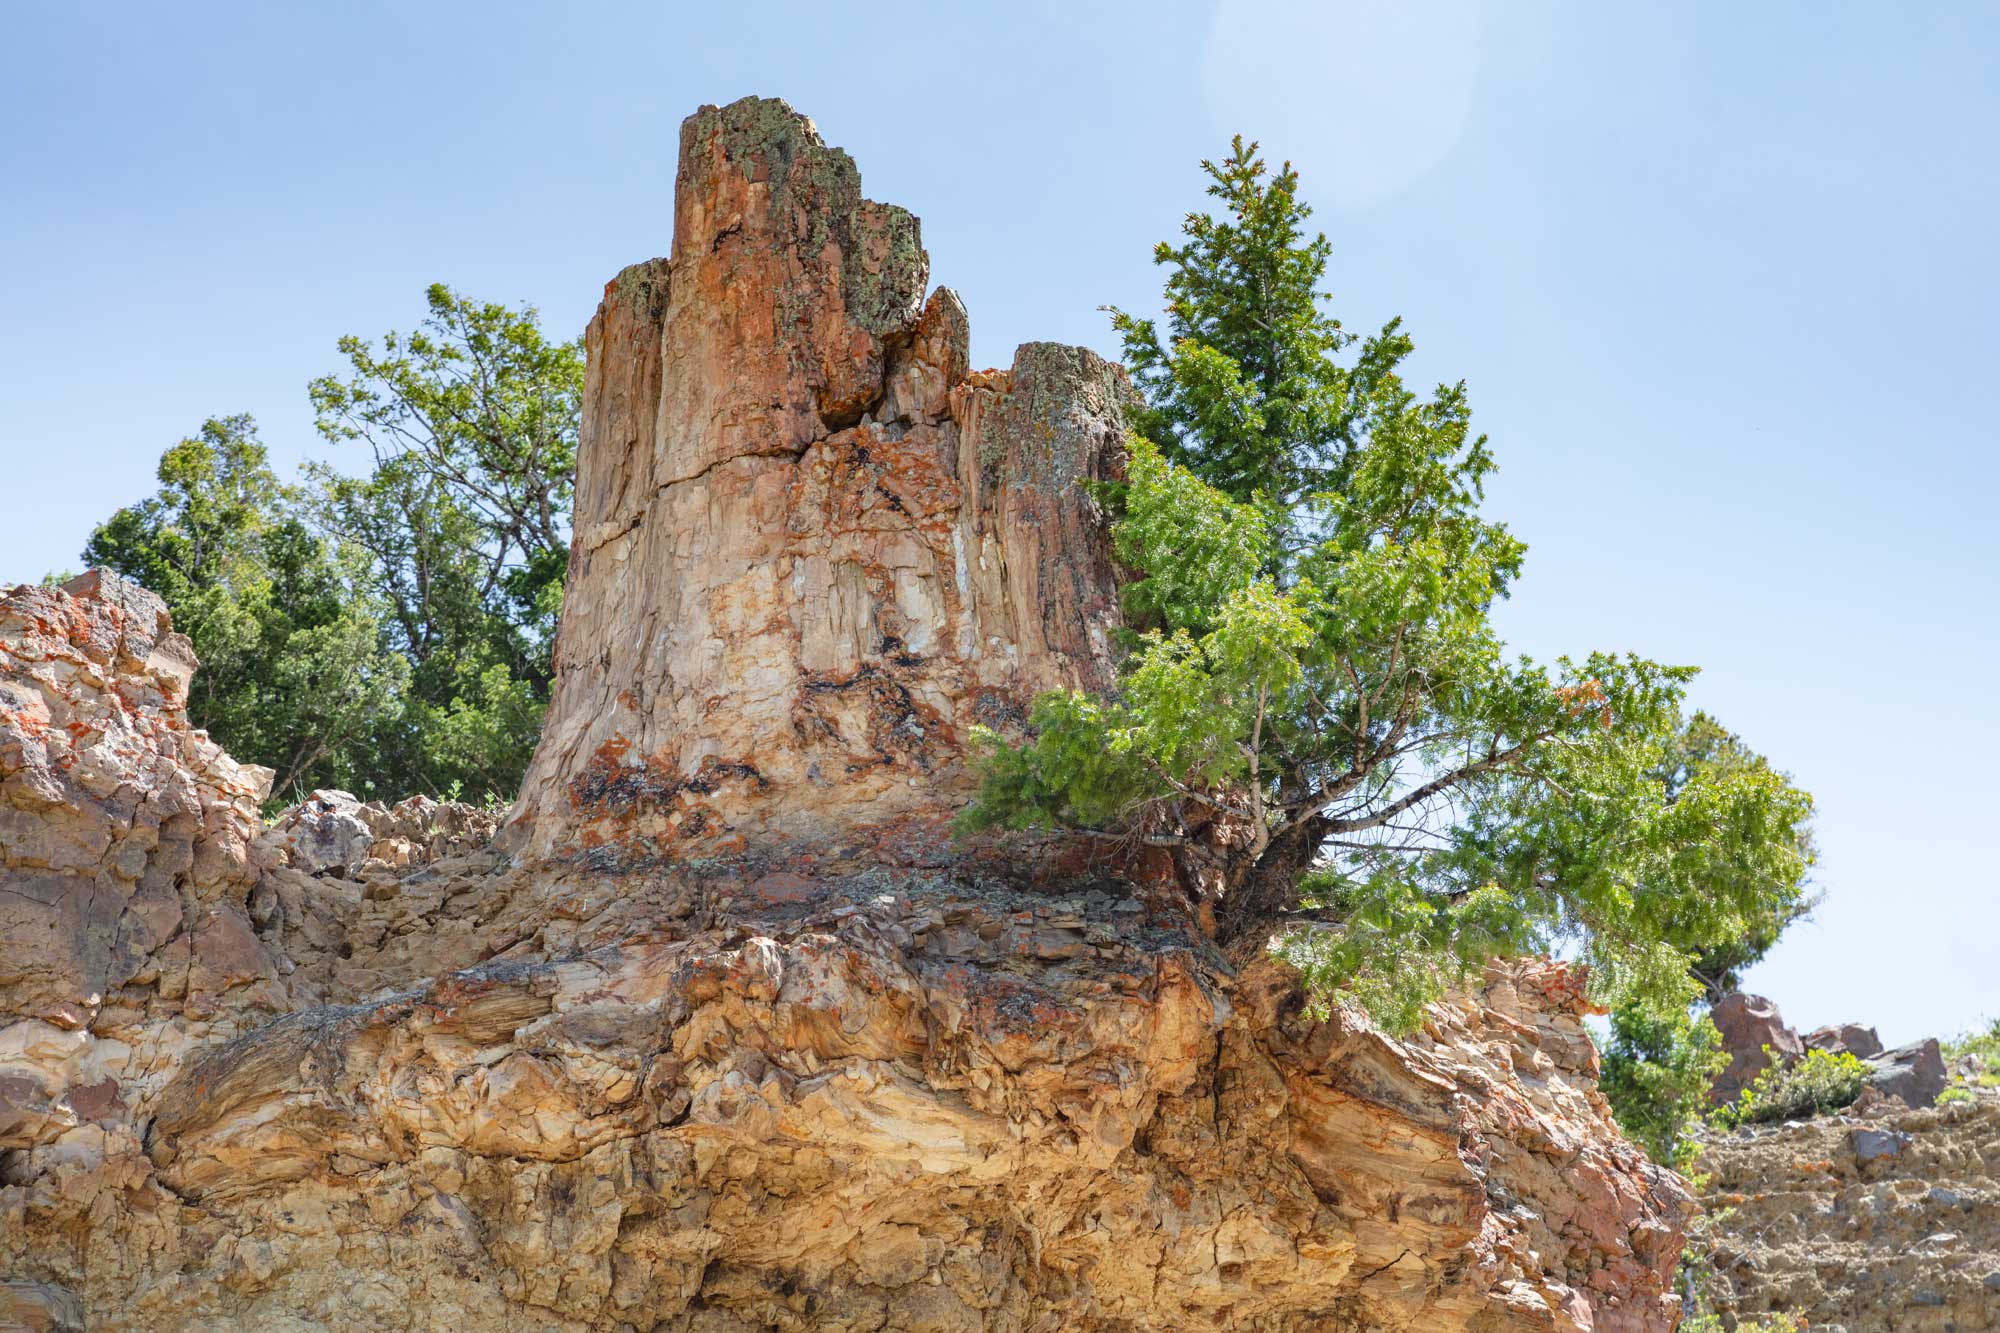 Photograph of a petrified tree stump on a ledge at Yellowstone National Park. The photo shows a petrified stump next to a short living conifer at the edge fo a ledge.